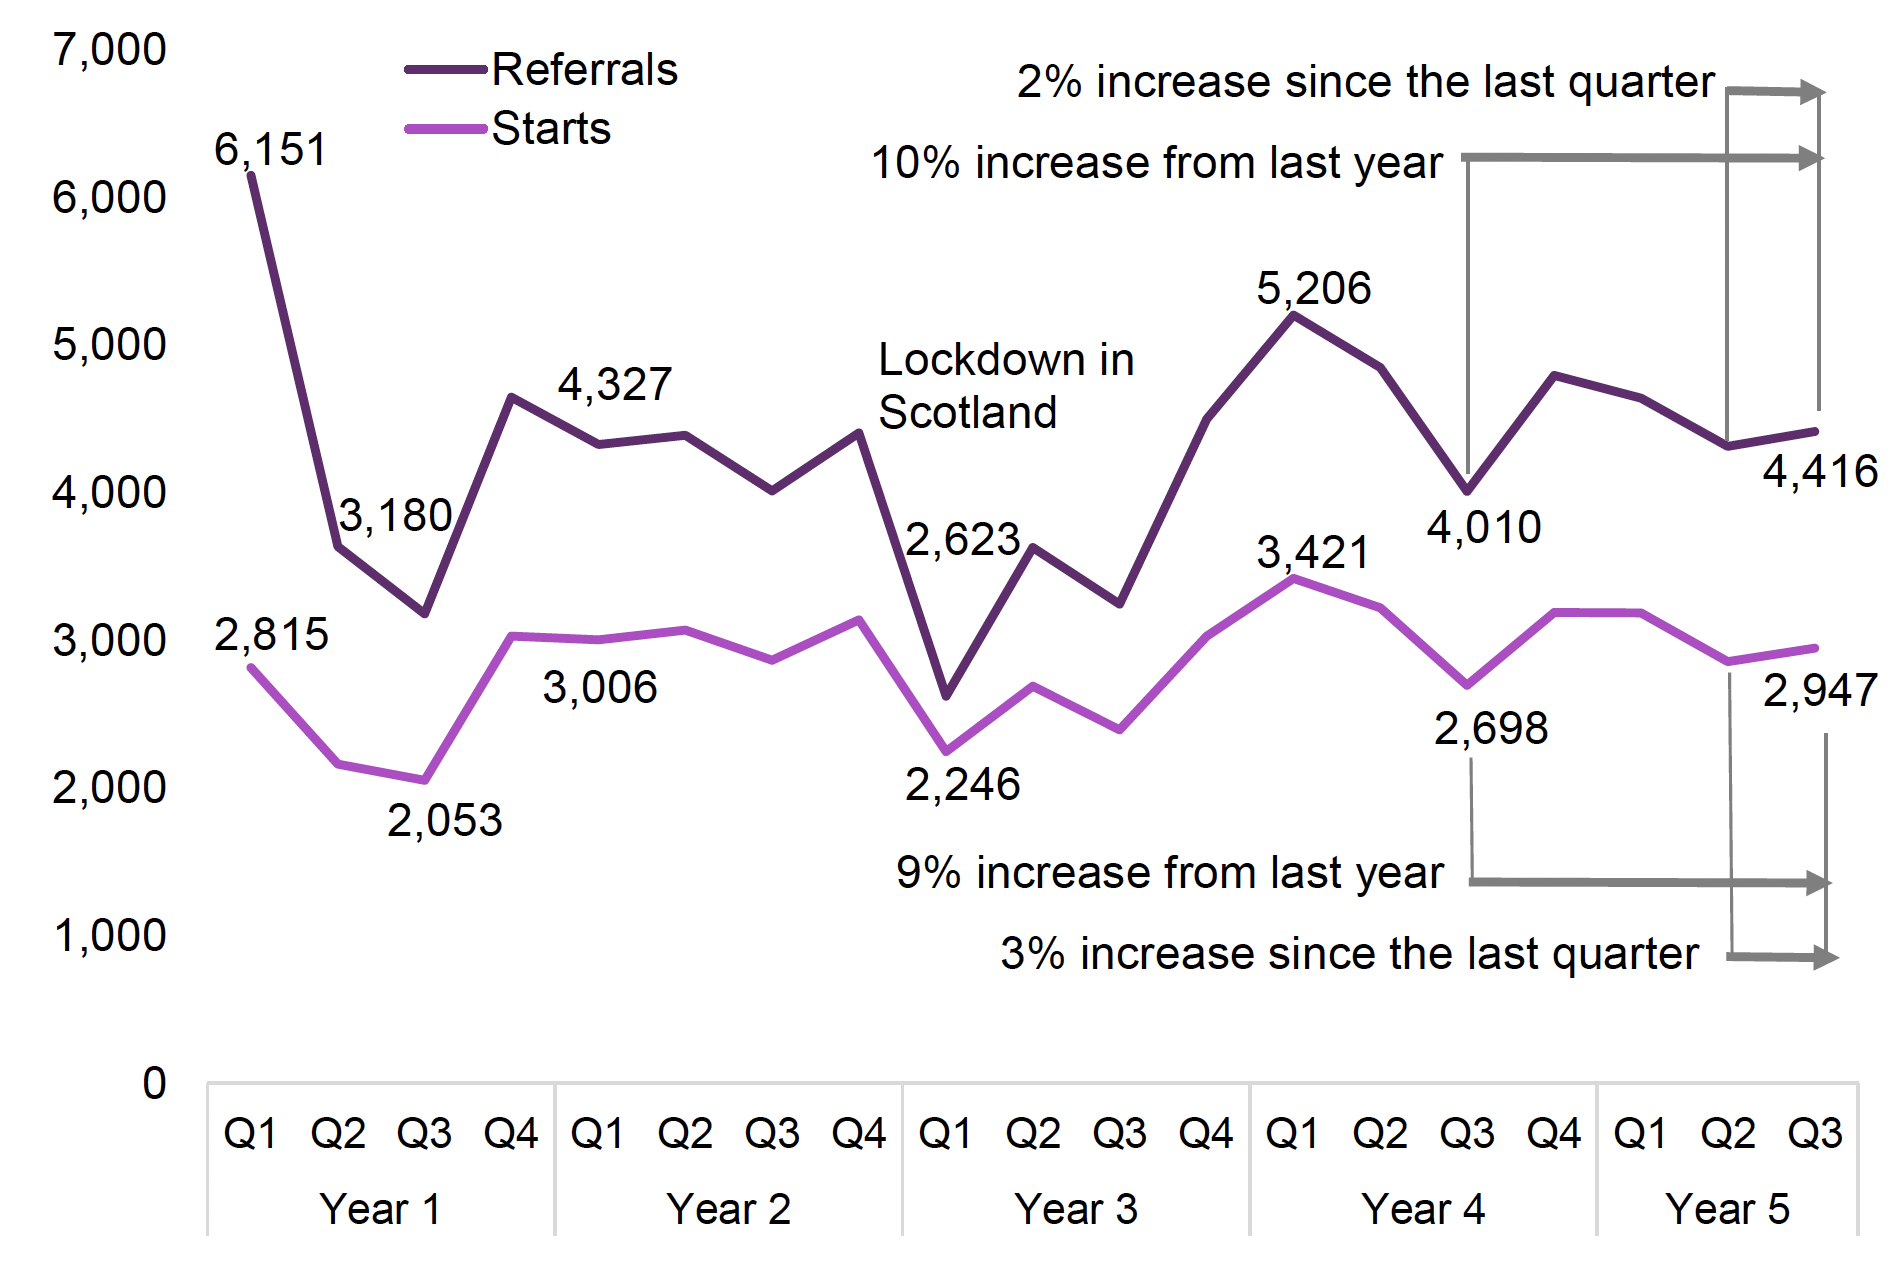 Referrals to FSS increased 10% from a year ago, whilst for starts there was a 9% increase